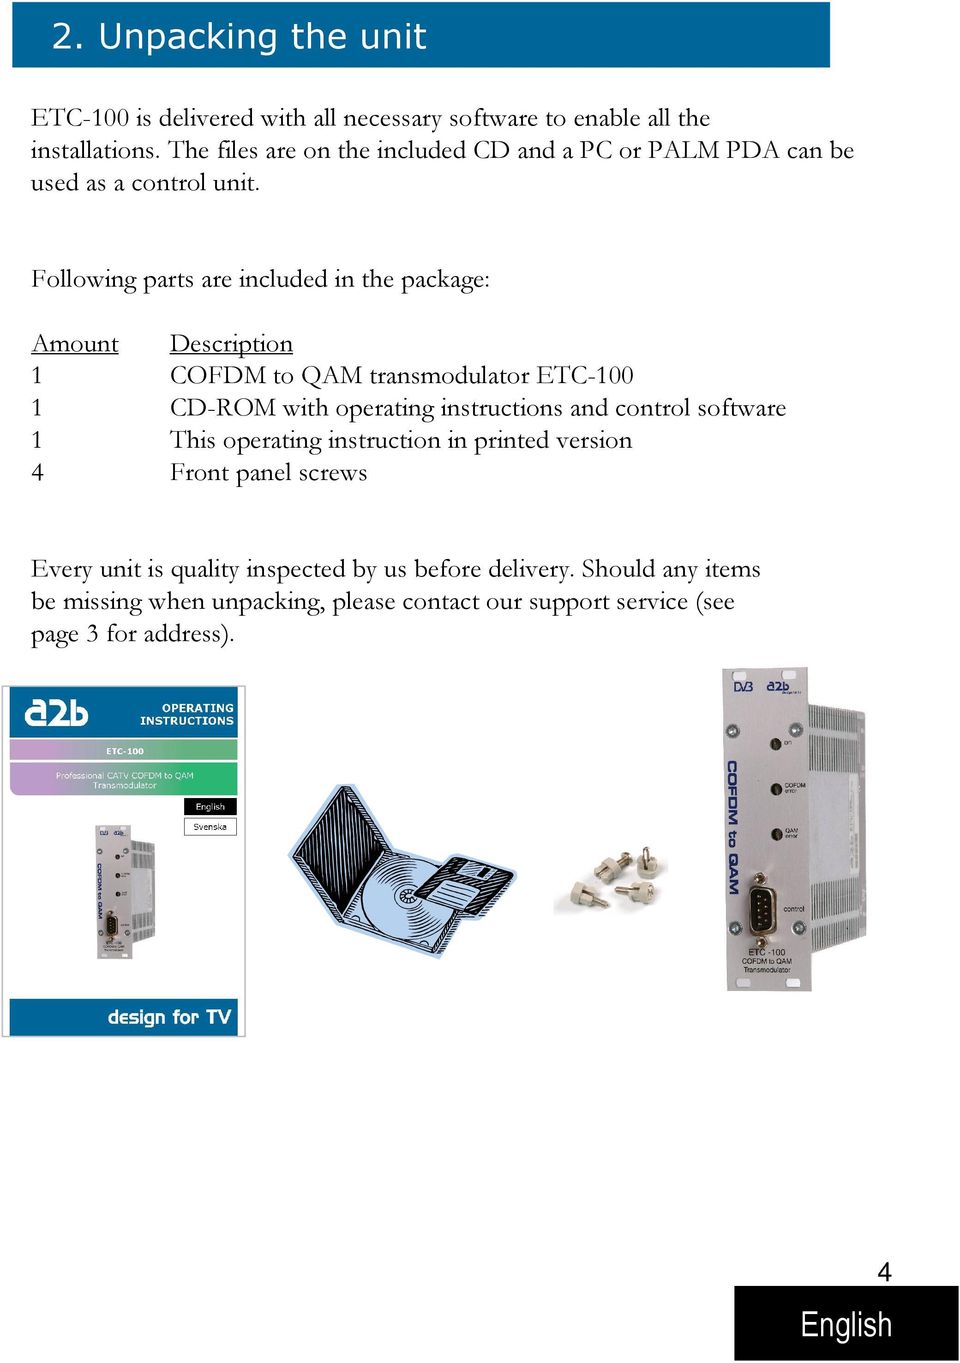 Following parts are included in the package: Amount Description 1 COFDM to QAM transmodulator ETC-100 1 CD-ROM with operating instructions and